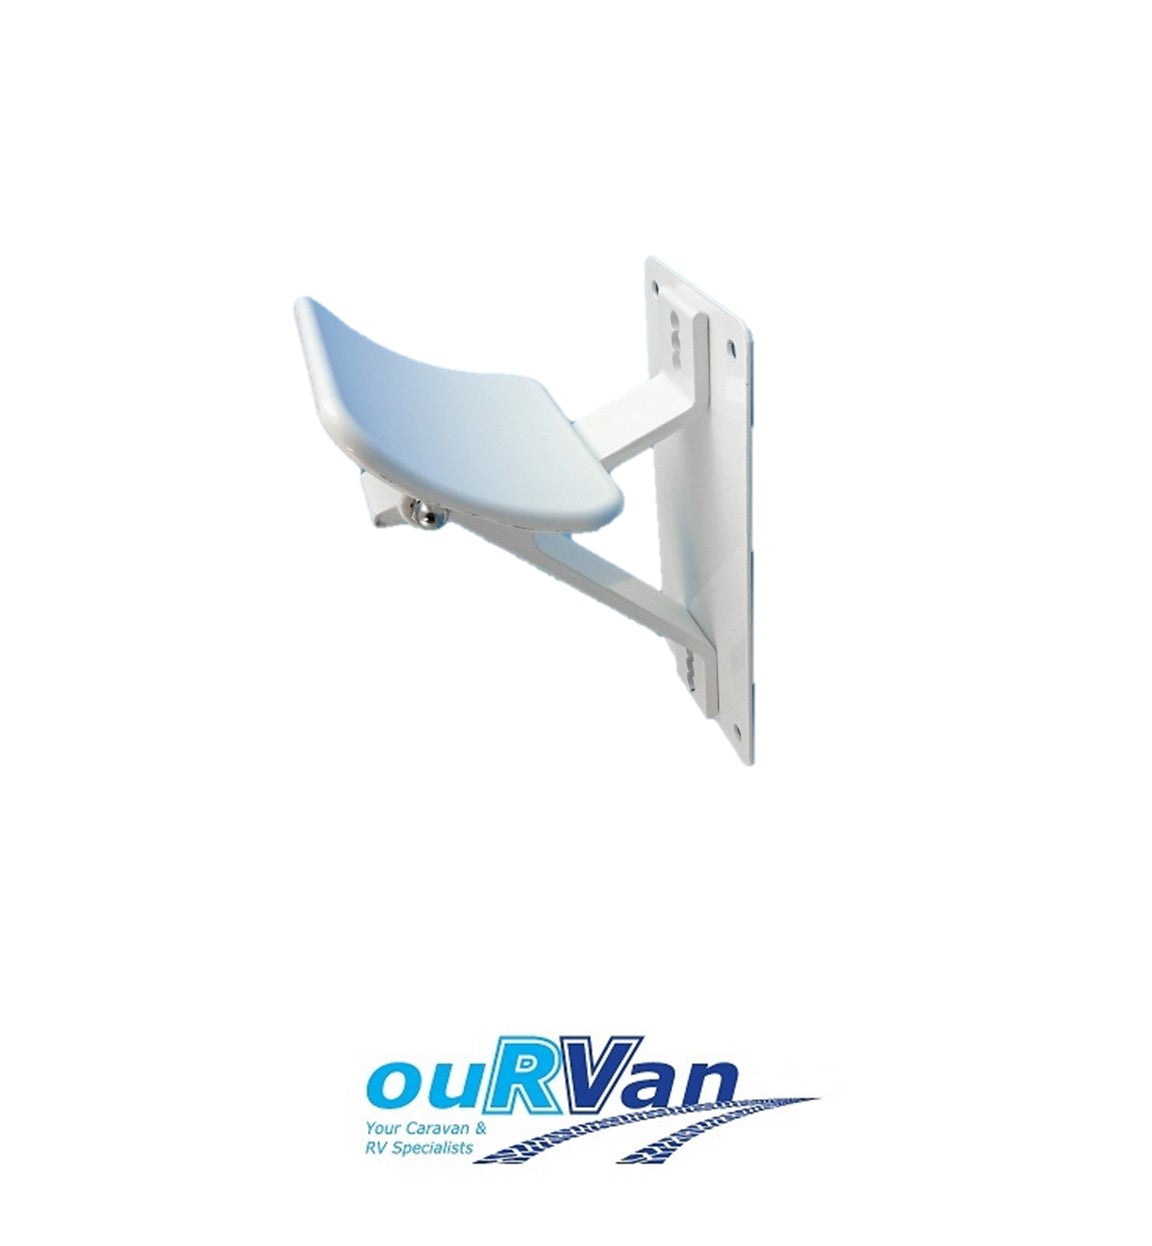 Carefree 902800w Automatic Awning Support Cradle White 001477 Caravan